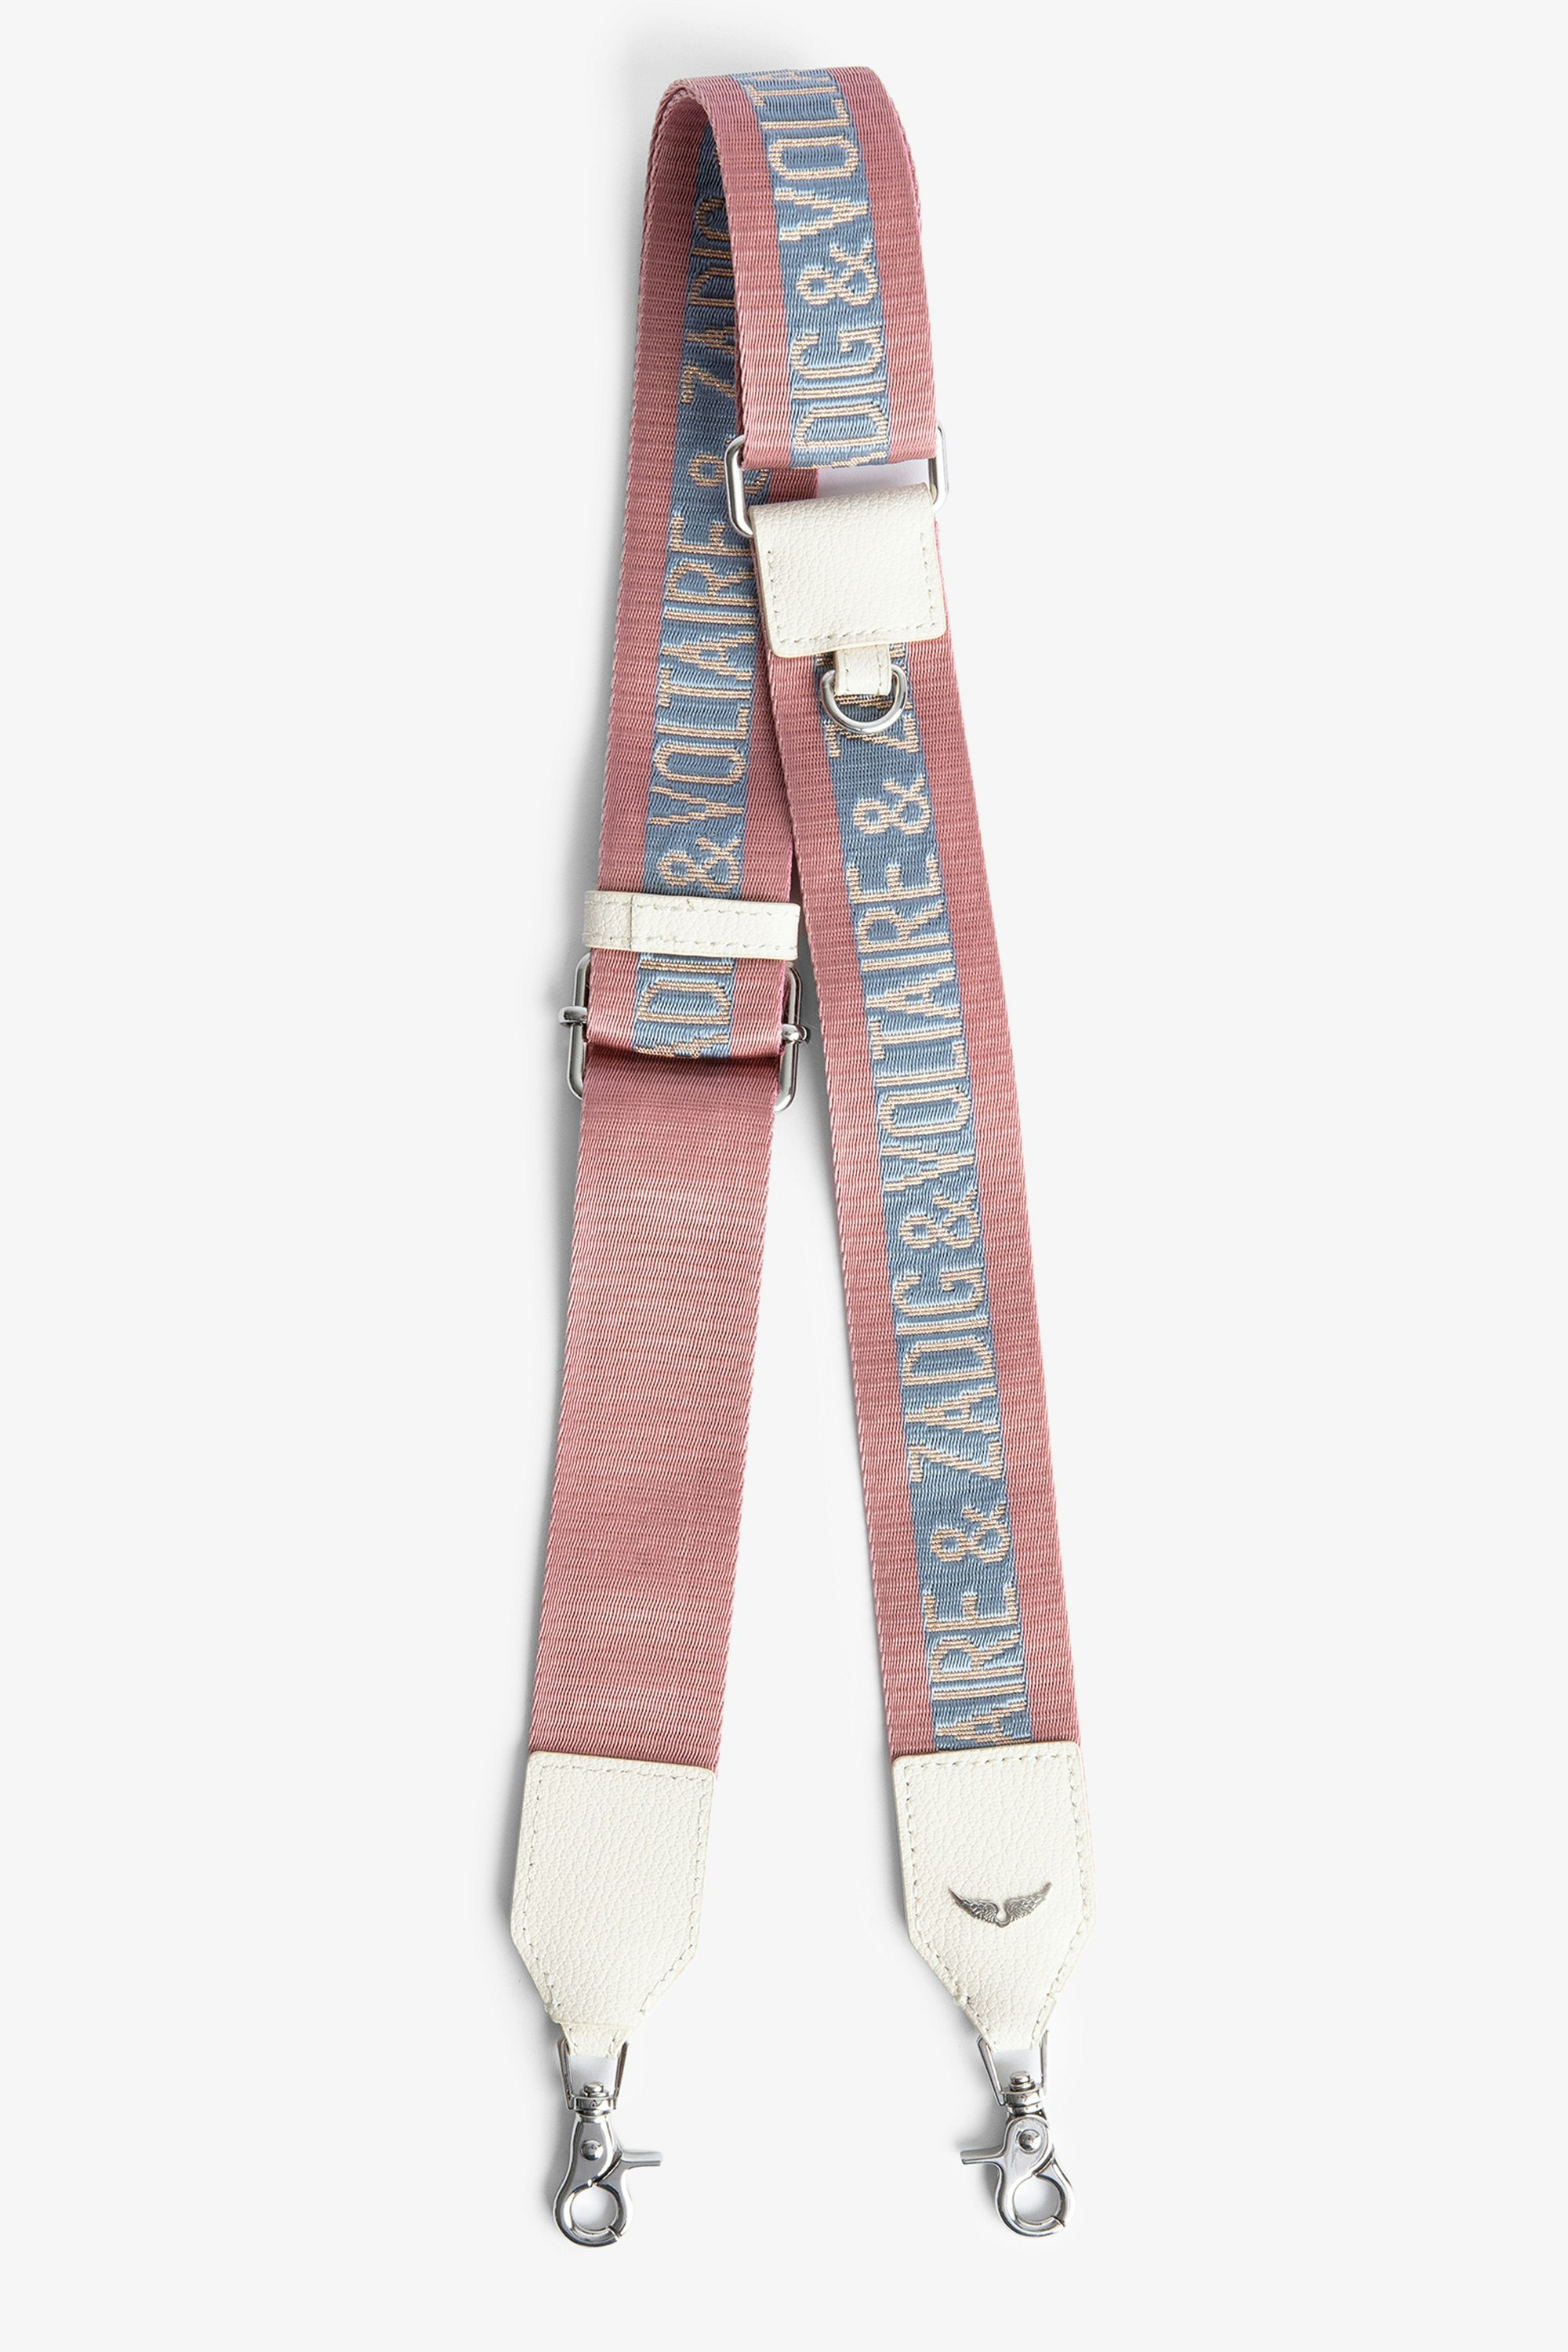 Zadig Shoulder Strap Women's shoulder strap in and pink and blue nylon and leather